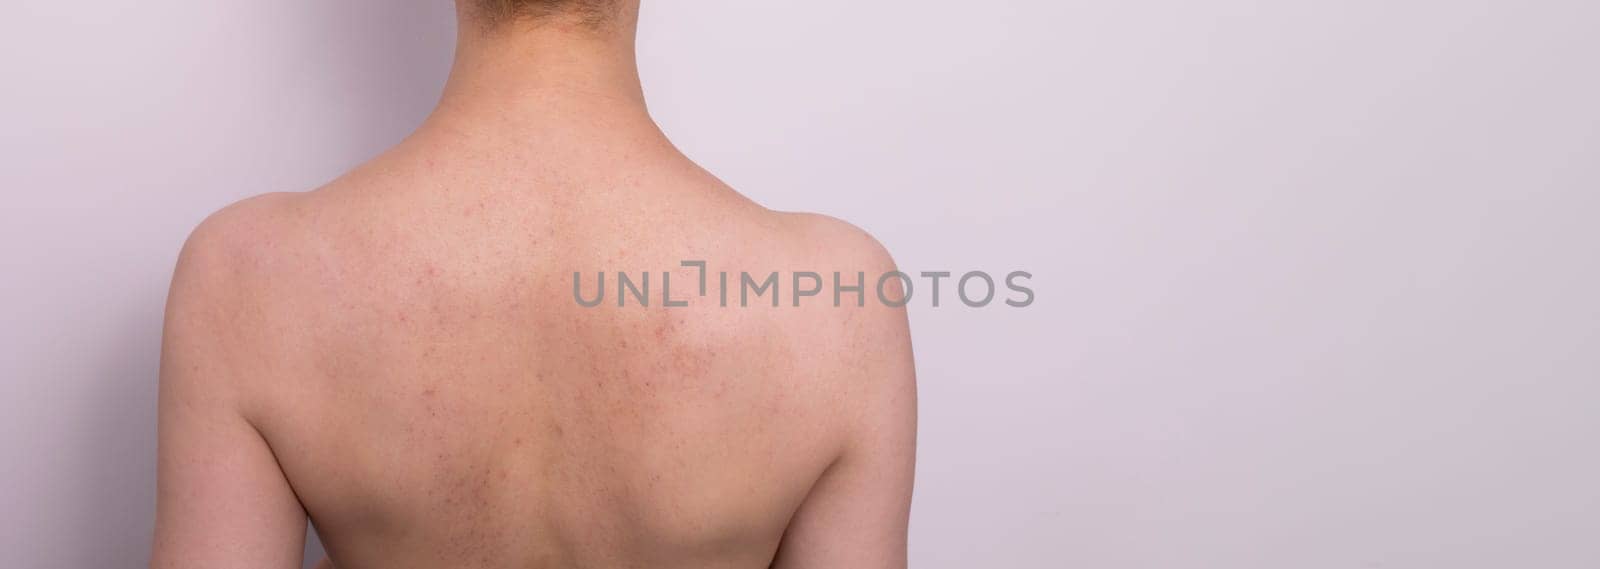 Bruises, Broken Capillaries After Cupping, Anti Cellulite Massage Procedure On Woman's Back. Feeling Bad, Effect, Consequences After Massage. Complications. Copy Space For Text. Horizontal Plane. by netatsi